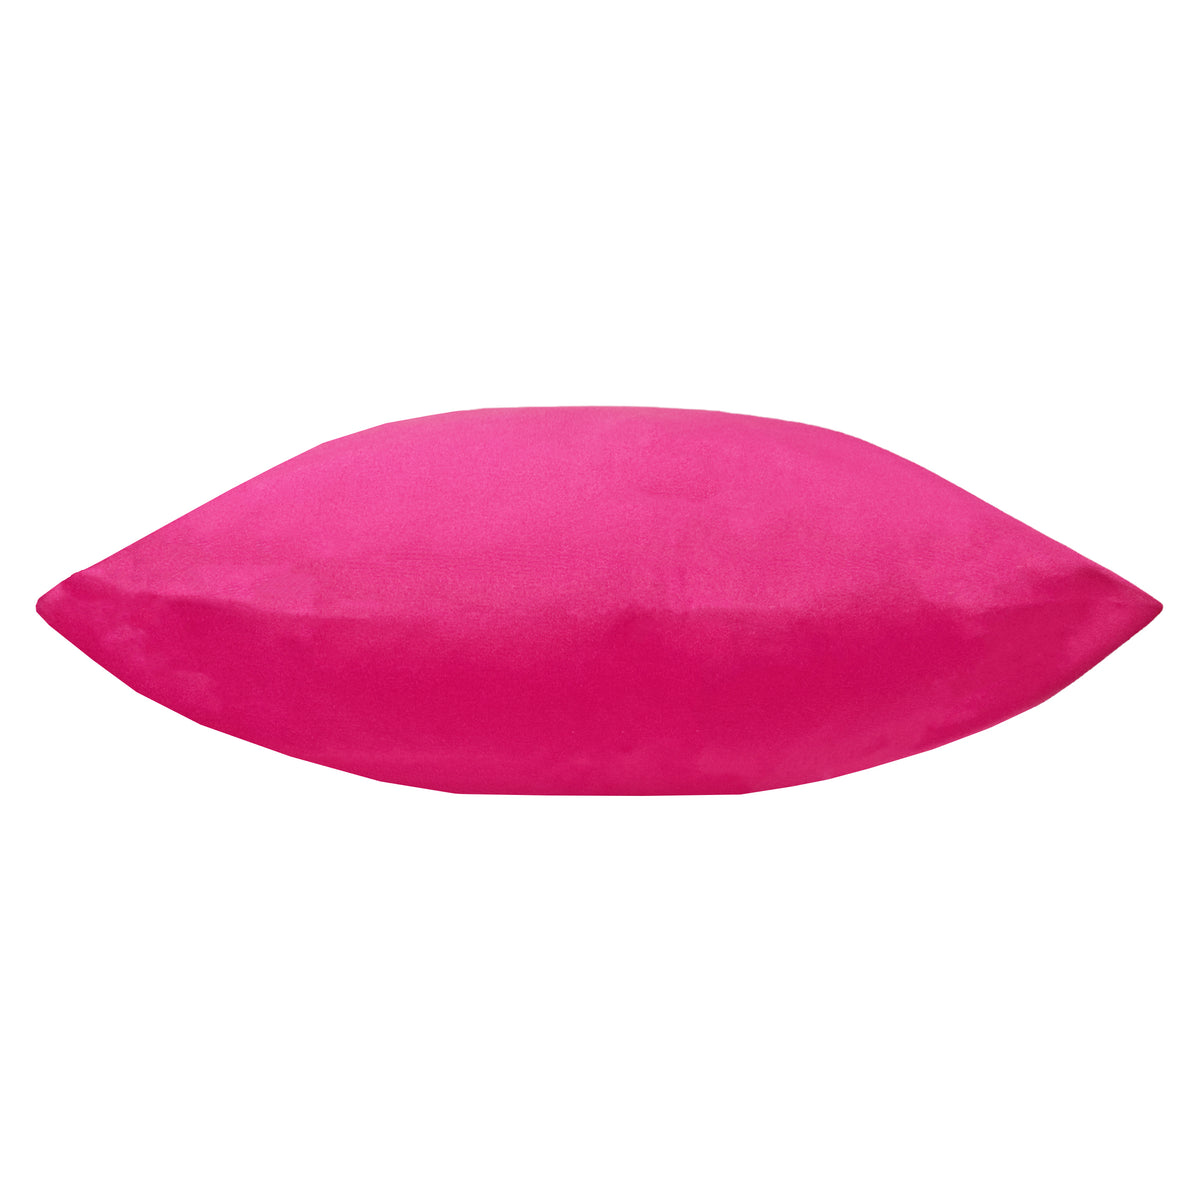 Plain 55X55 Outdoor Polyester Cushion Pink 2 Pack